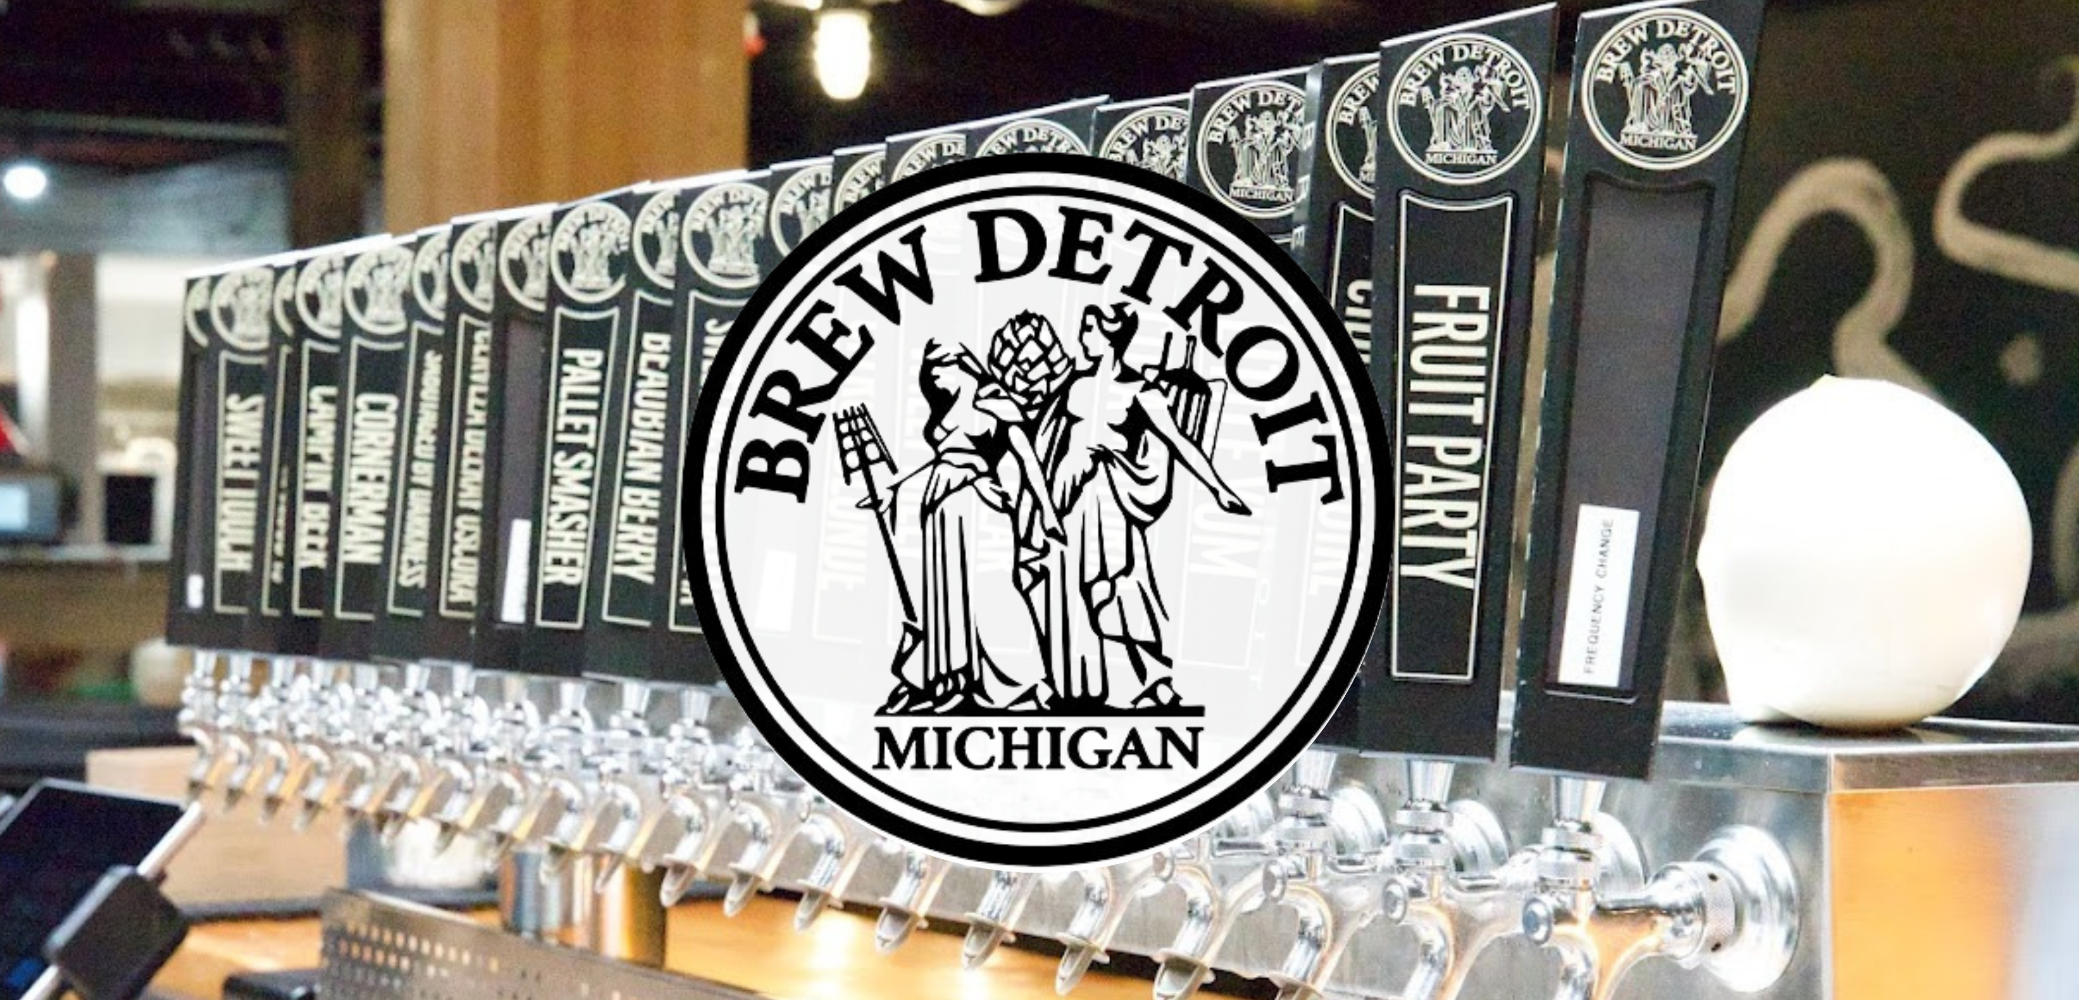 Excess Assets of Brew Detroit - Complete Bottling, Keg and Secondary Packaging Auction - Late Pearson Equip, Filling, Labeling, Keg Washer, More